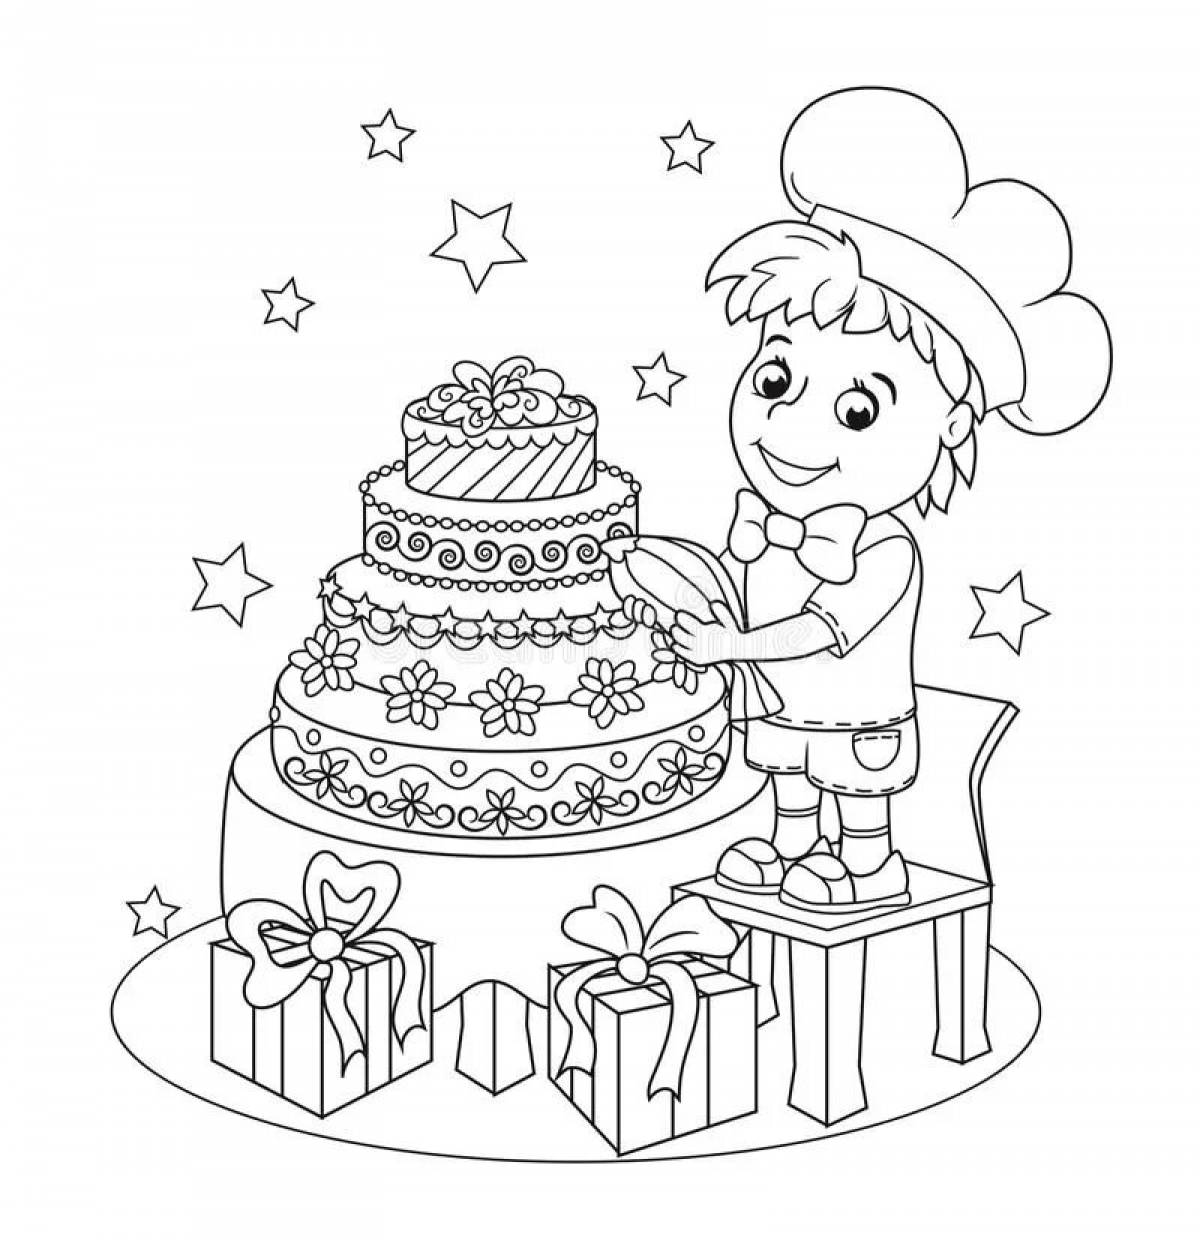 Crazy pastry chef coloring pages